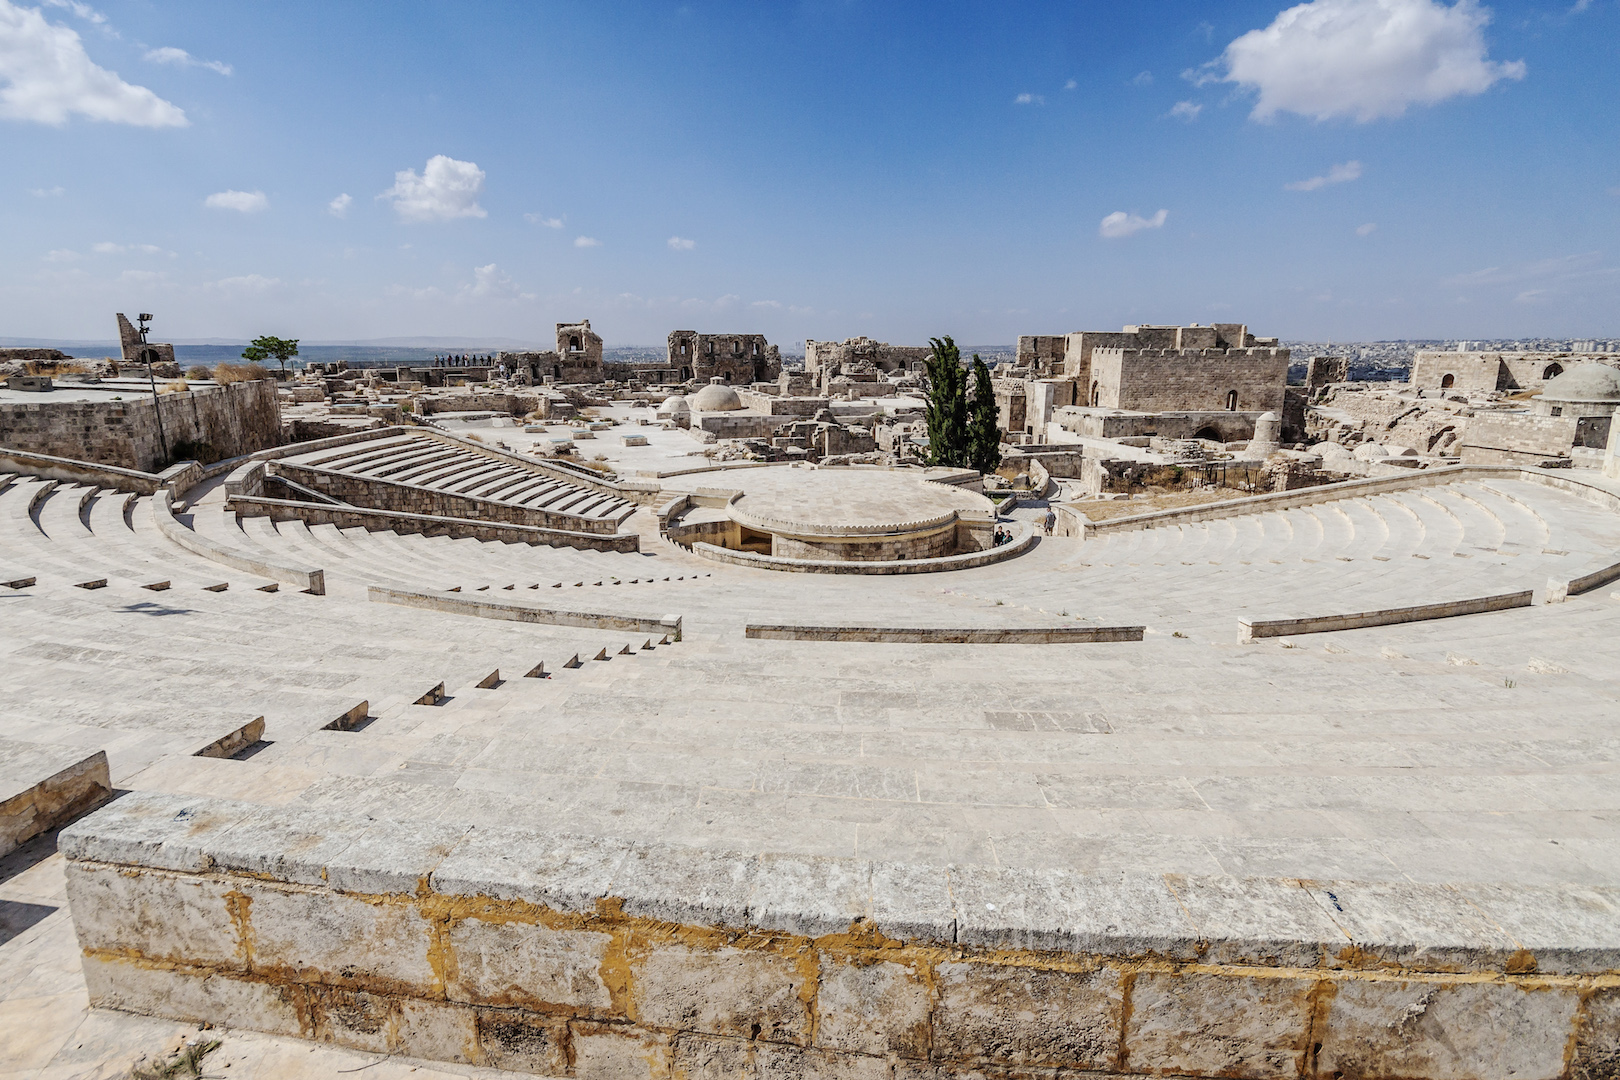 The view across the amphitheater of The Citadel in Aleppo, Syria.